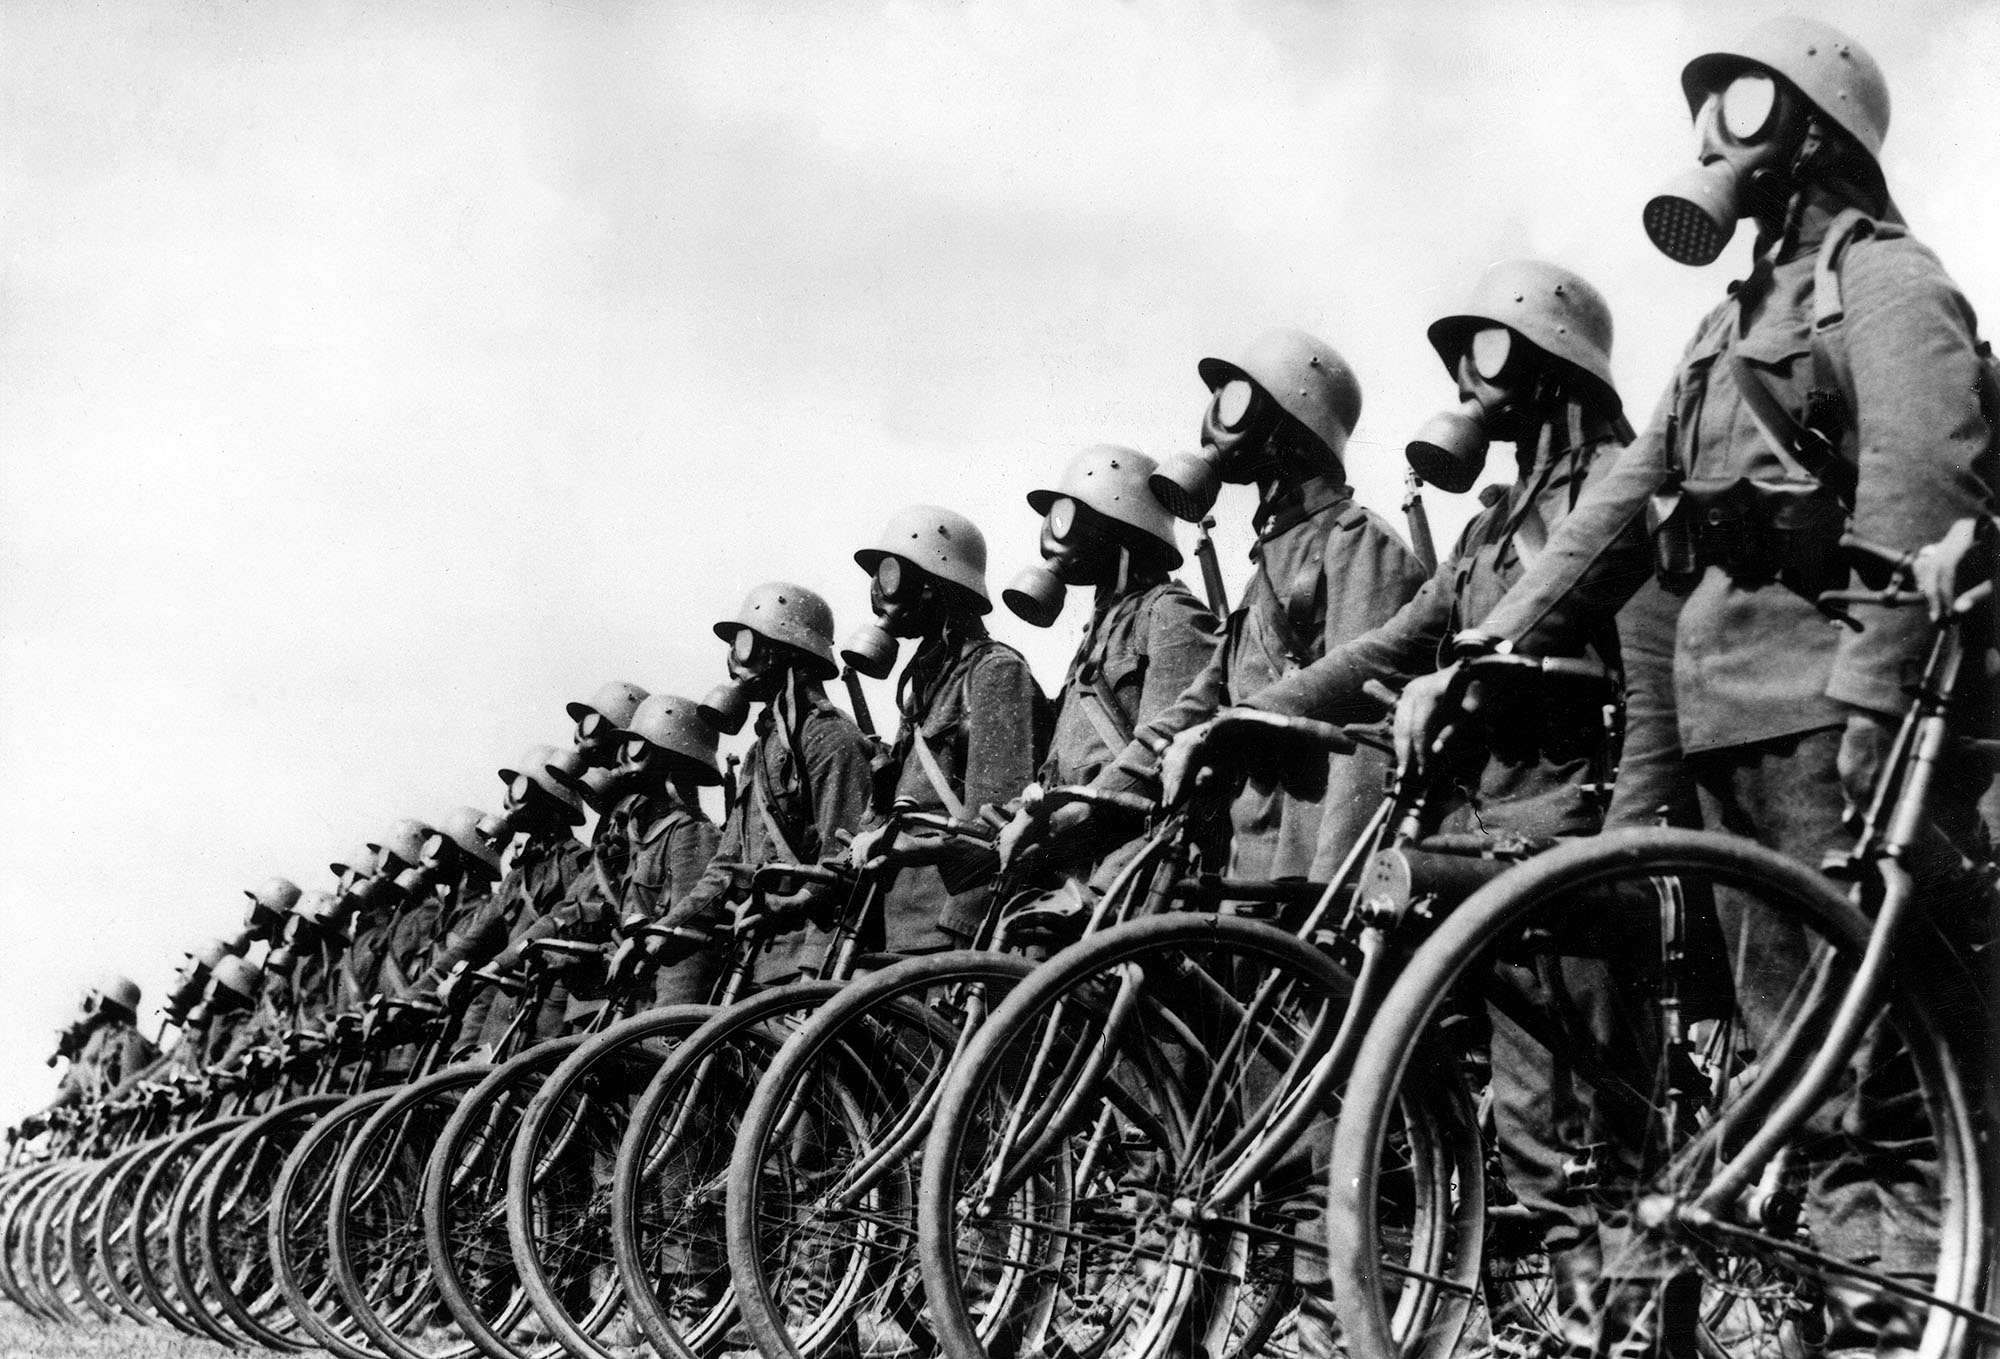 Members of the German light-machine-gun bicycle corps wear gas masks while standing beside their bicycles